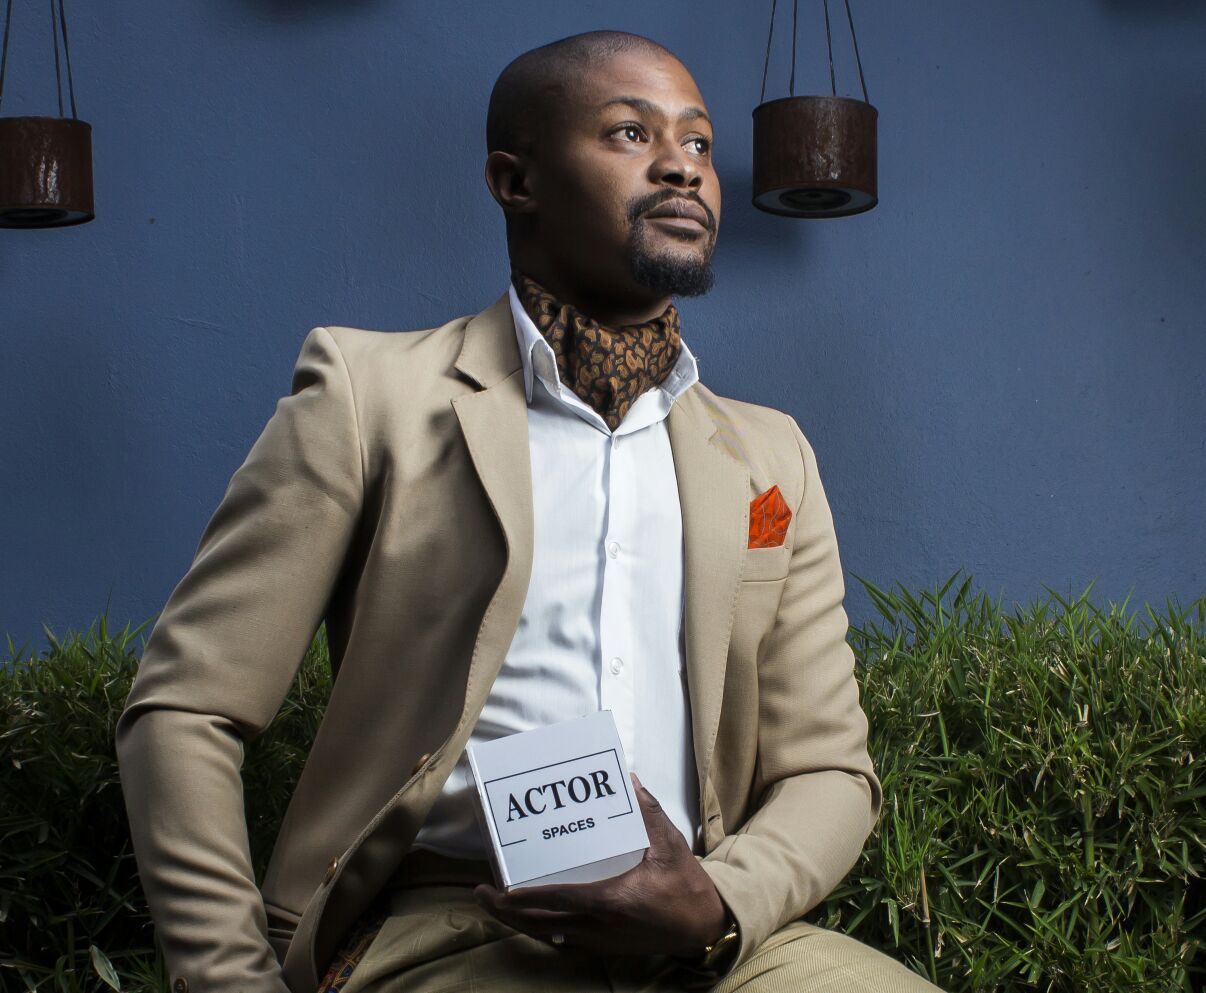 Update on Kagiso Modupe’s book